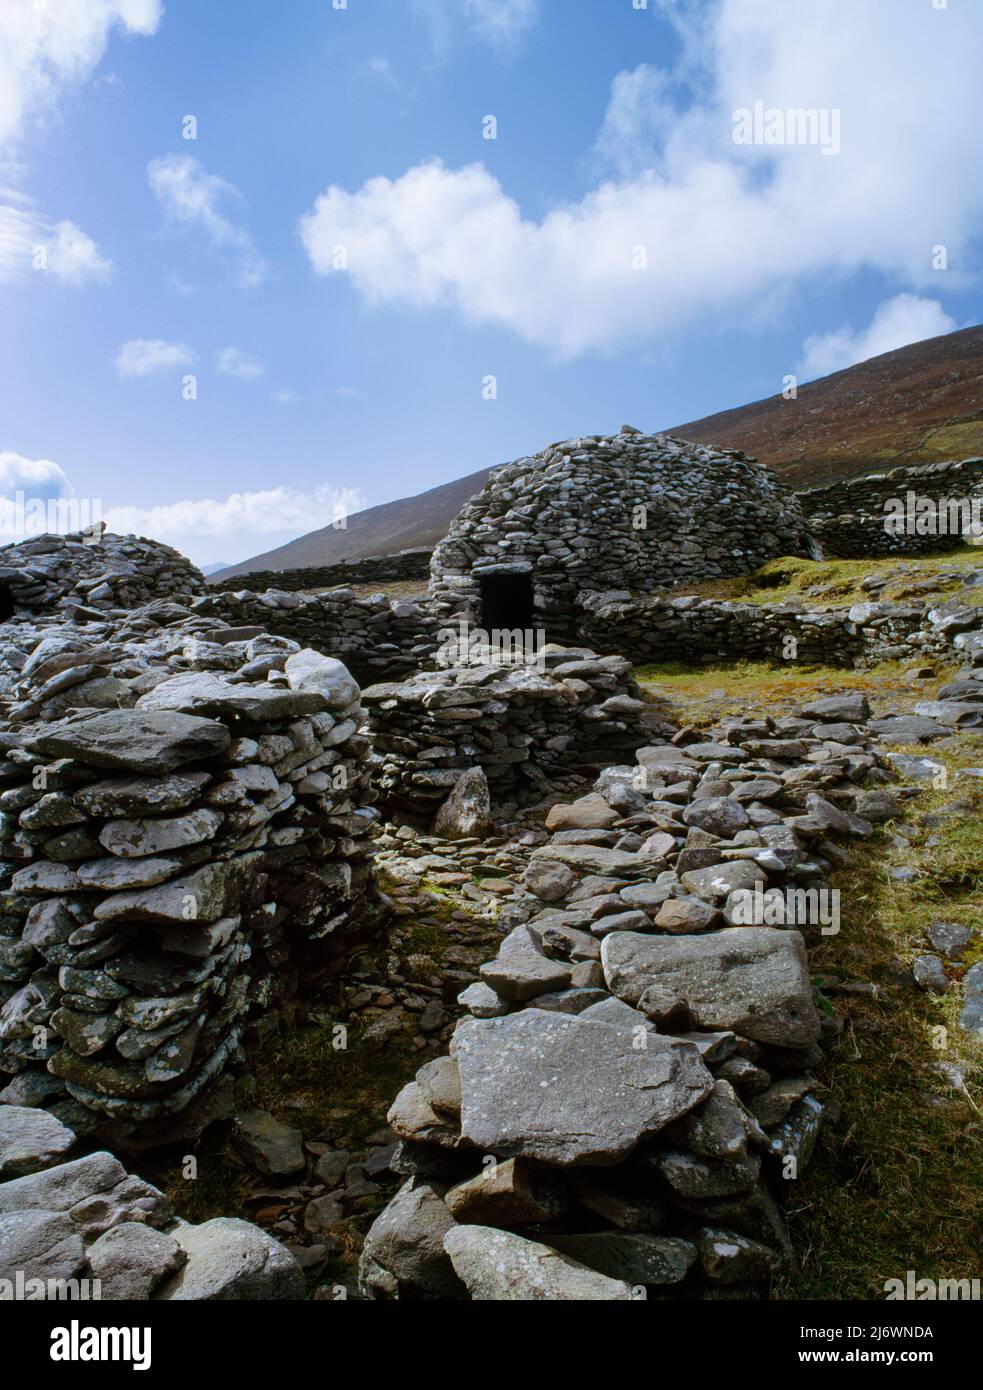 View NW of beehive huts (clochans) within the circular stone wall of Caher Martin cashel (fort), Glanfahan, Dingle, County Kerry, Republic of Ireland. Stock Photo